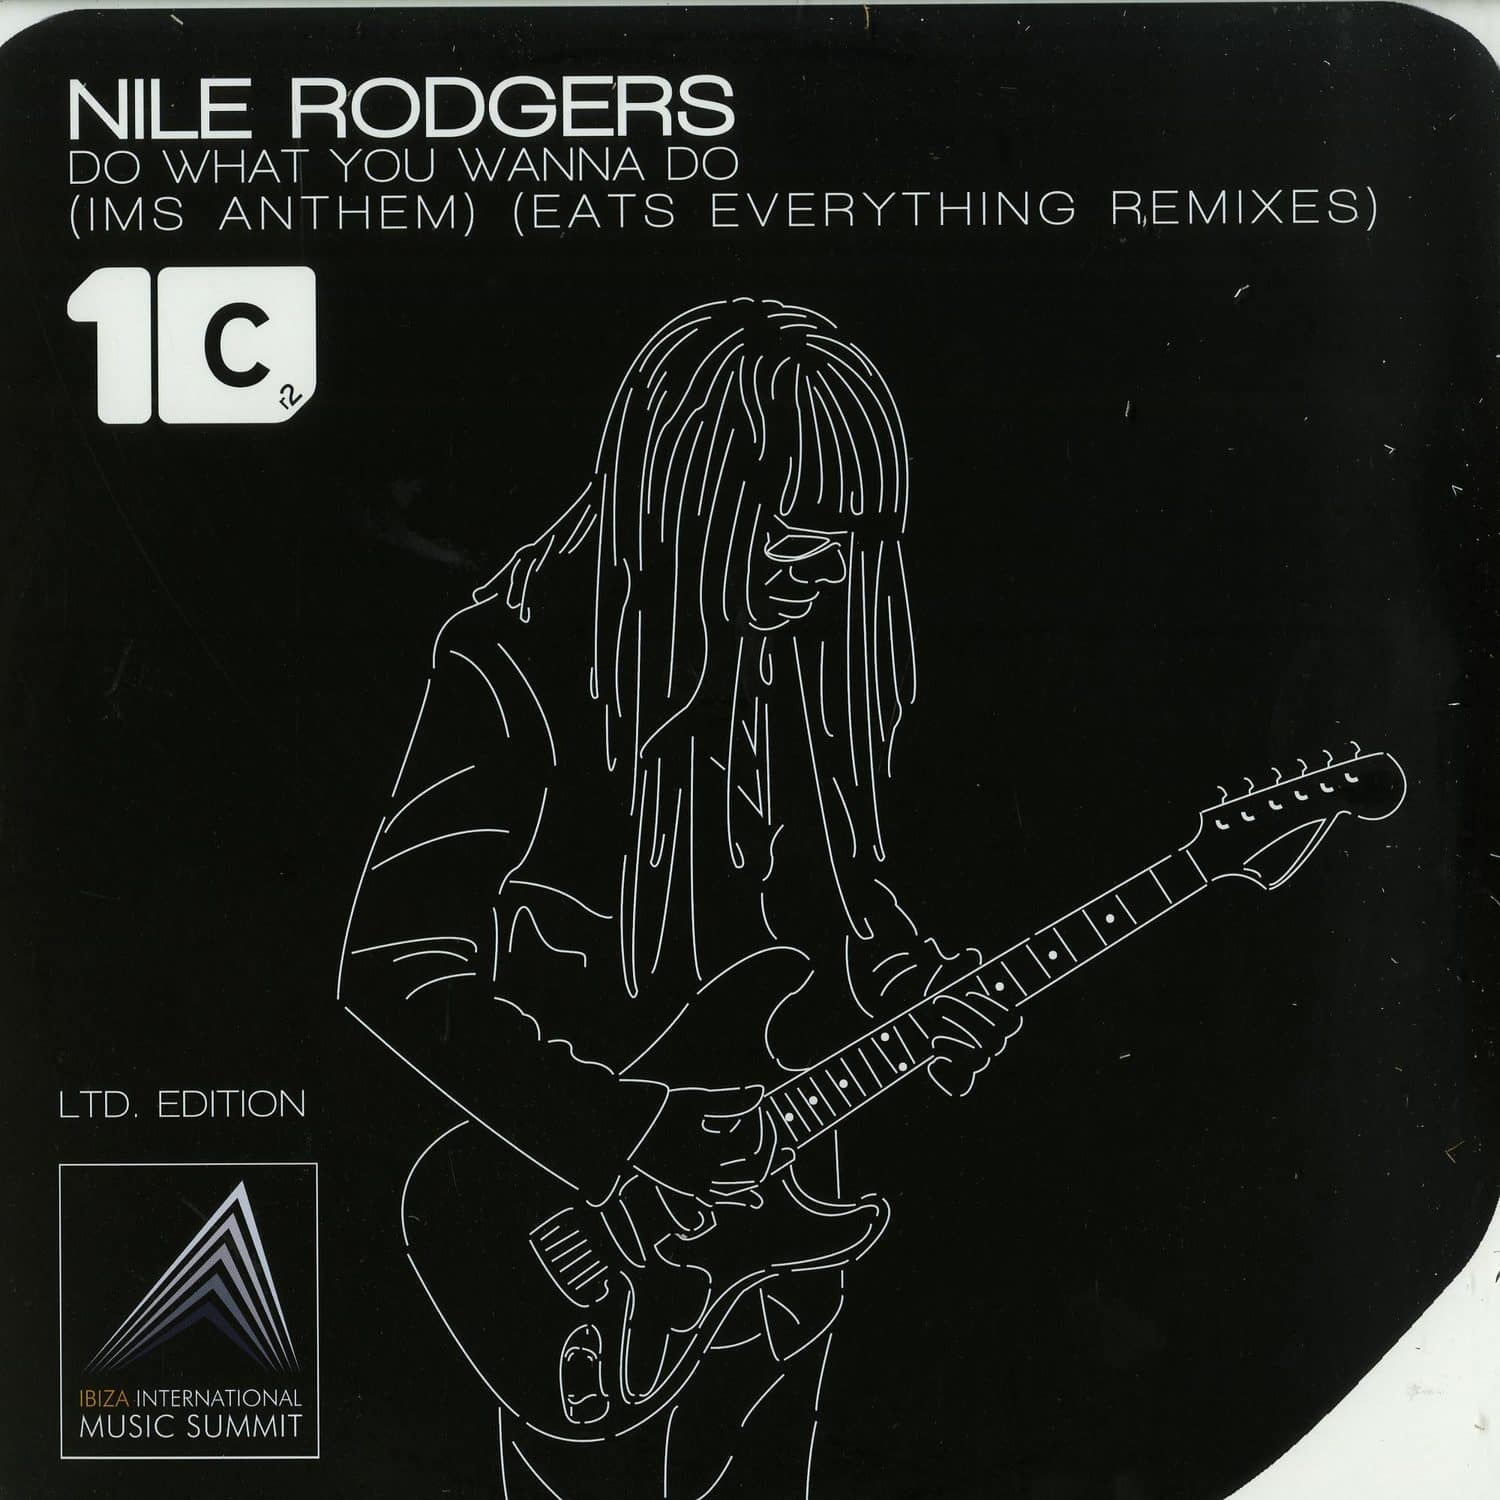 Nile Rodgers - DO WHAT YOU WANNA DO 